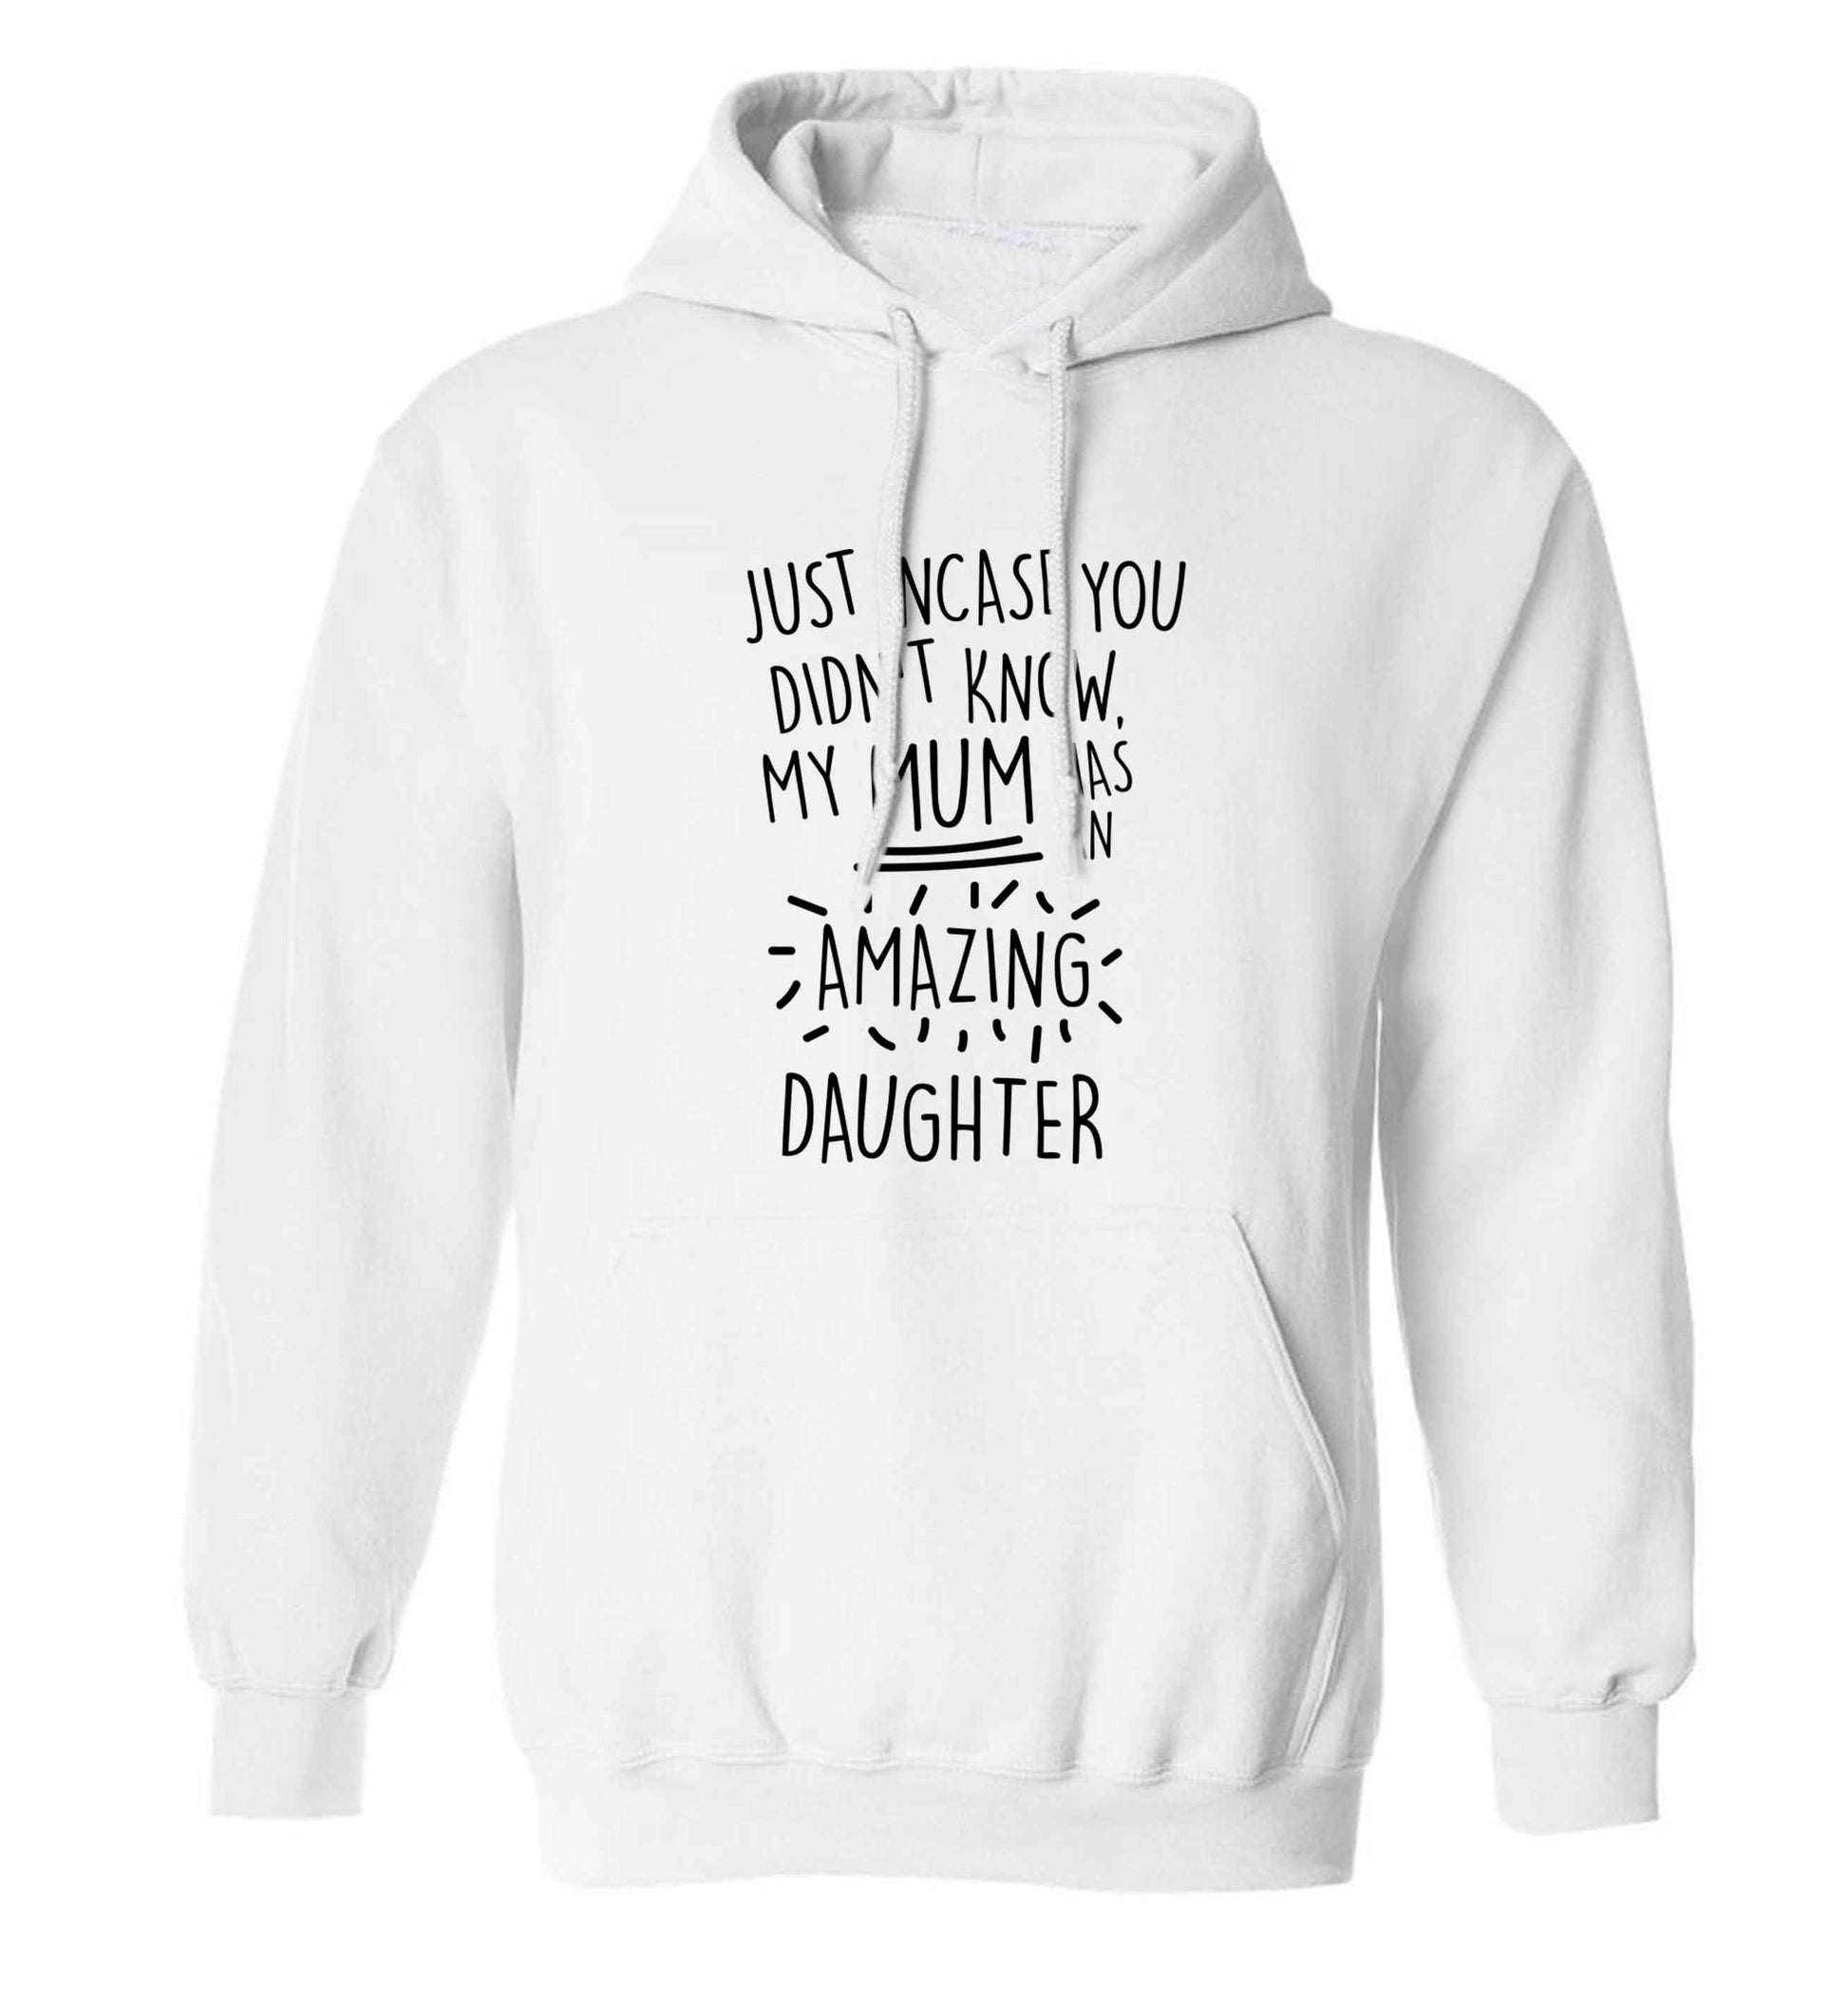 Just incase you didn't know my mum has an amazing daughter adults unisex white hoodie 2XL